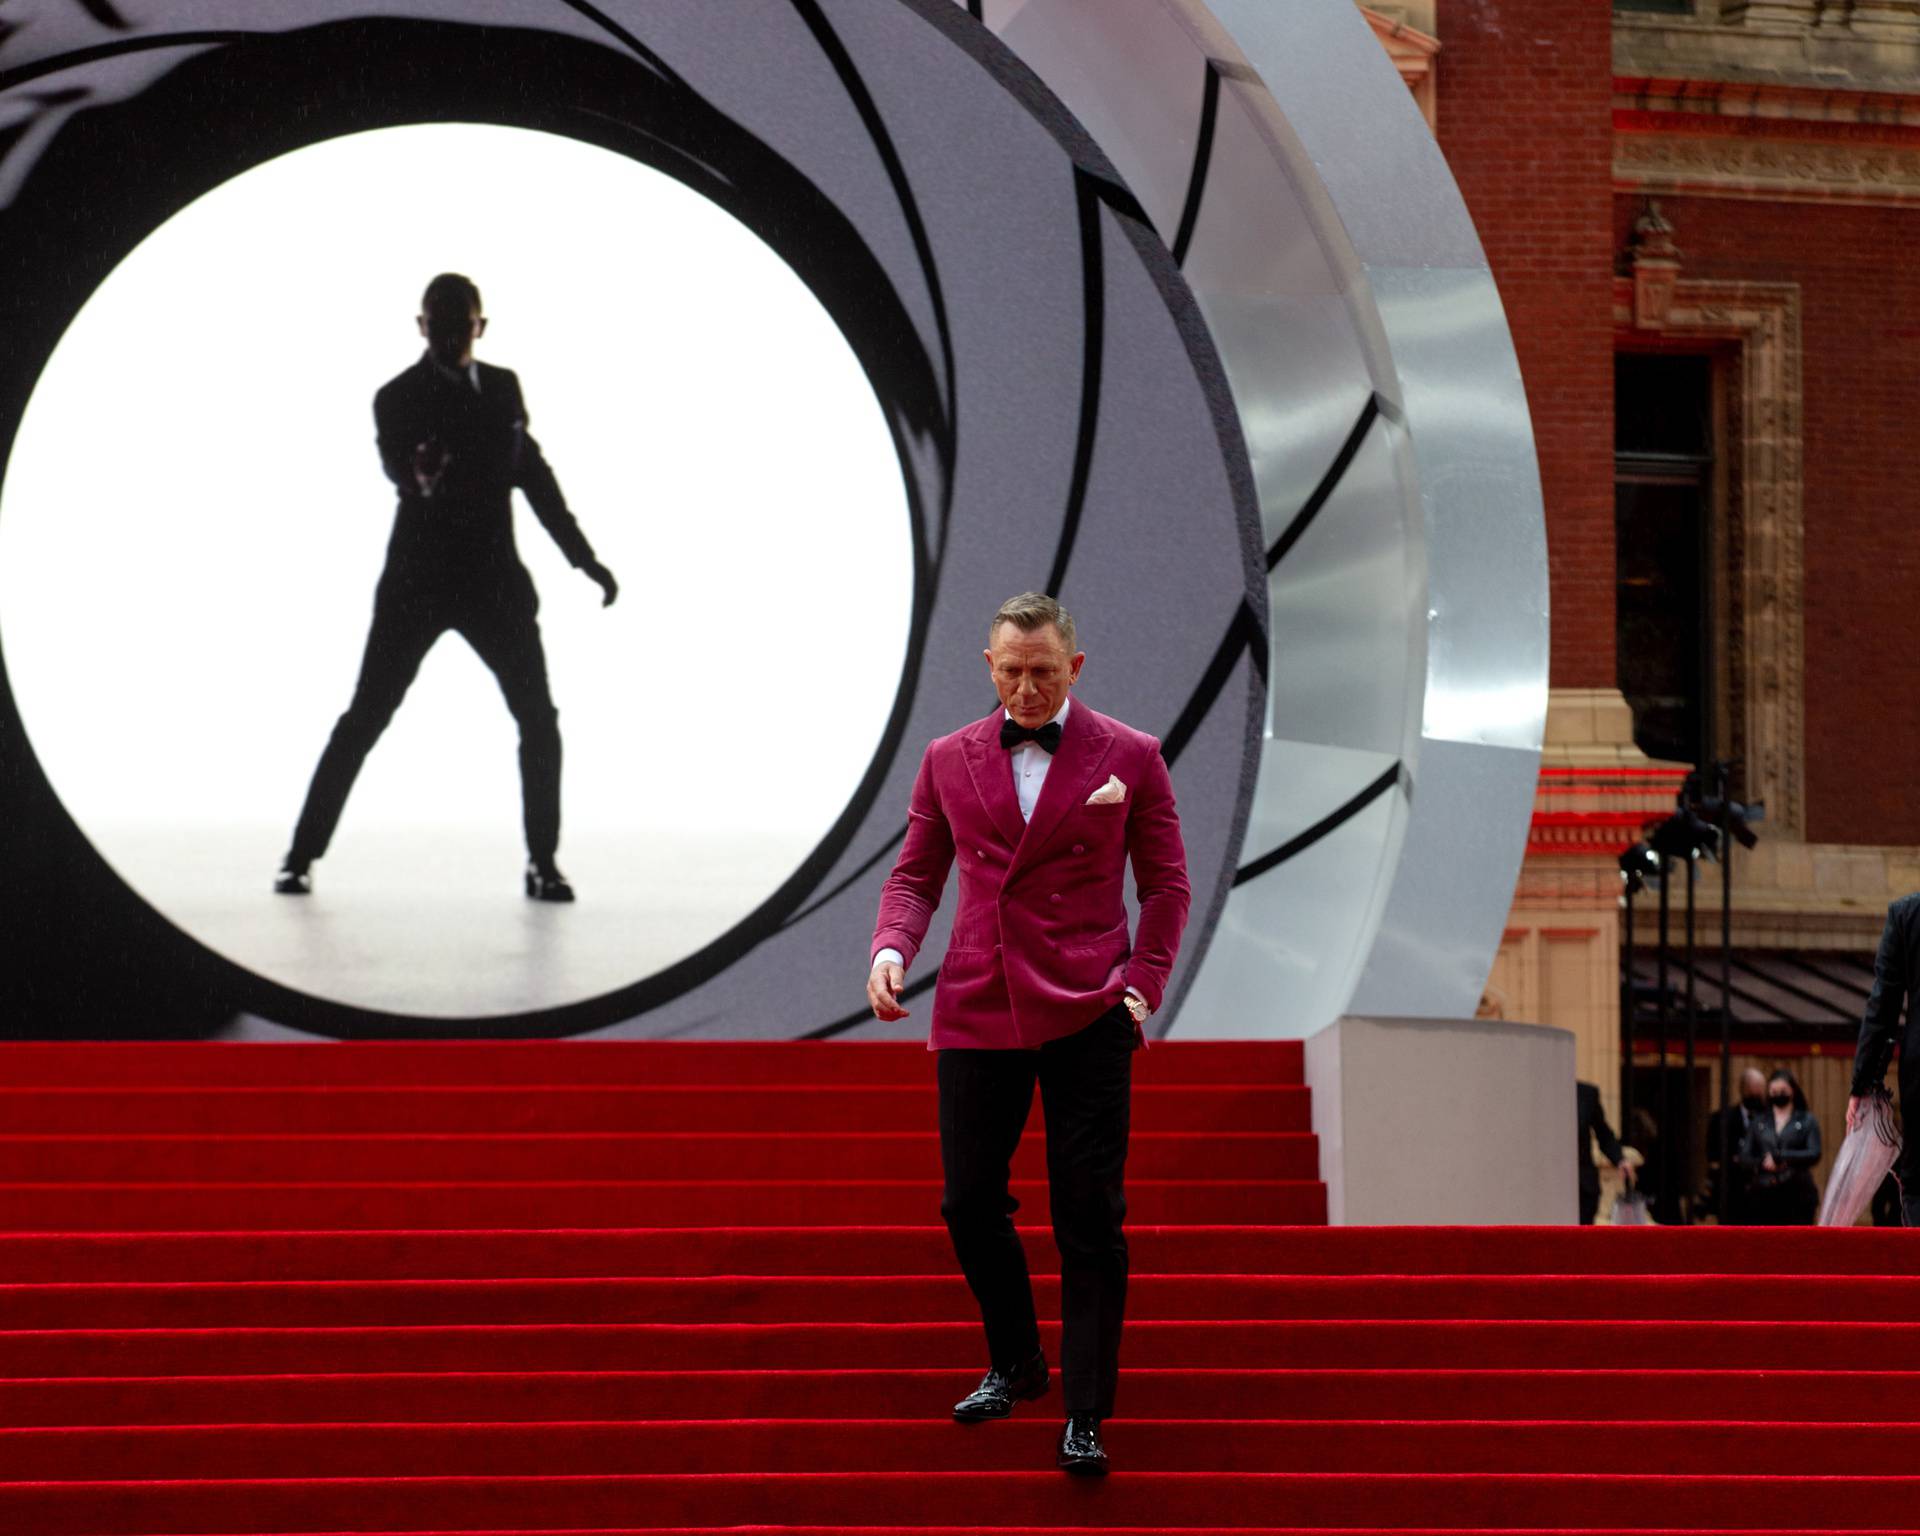 James Bond's 'No Time To Die' World Film Premiere Held at the Royal Albert Hall